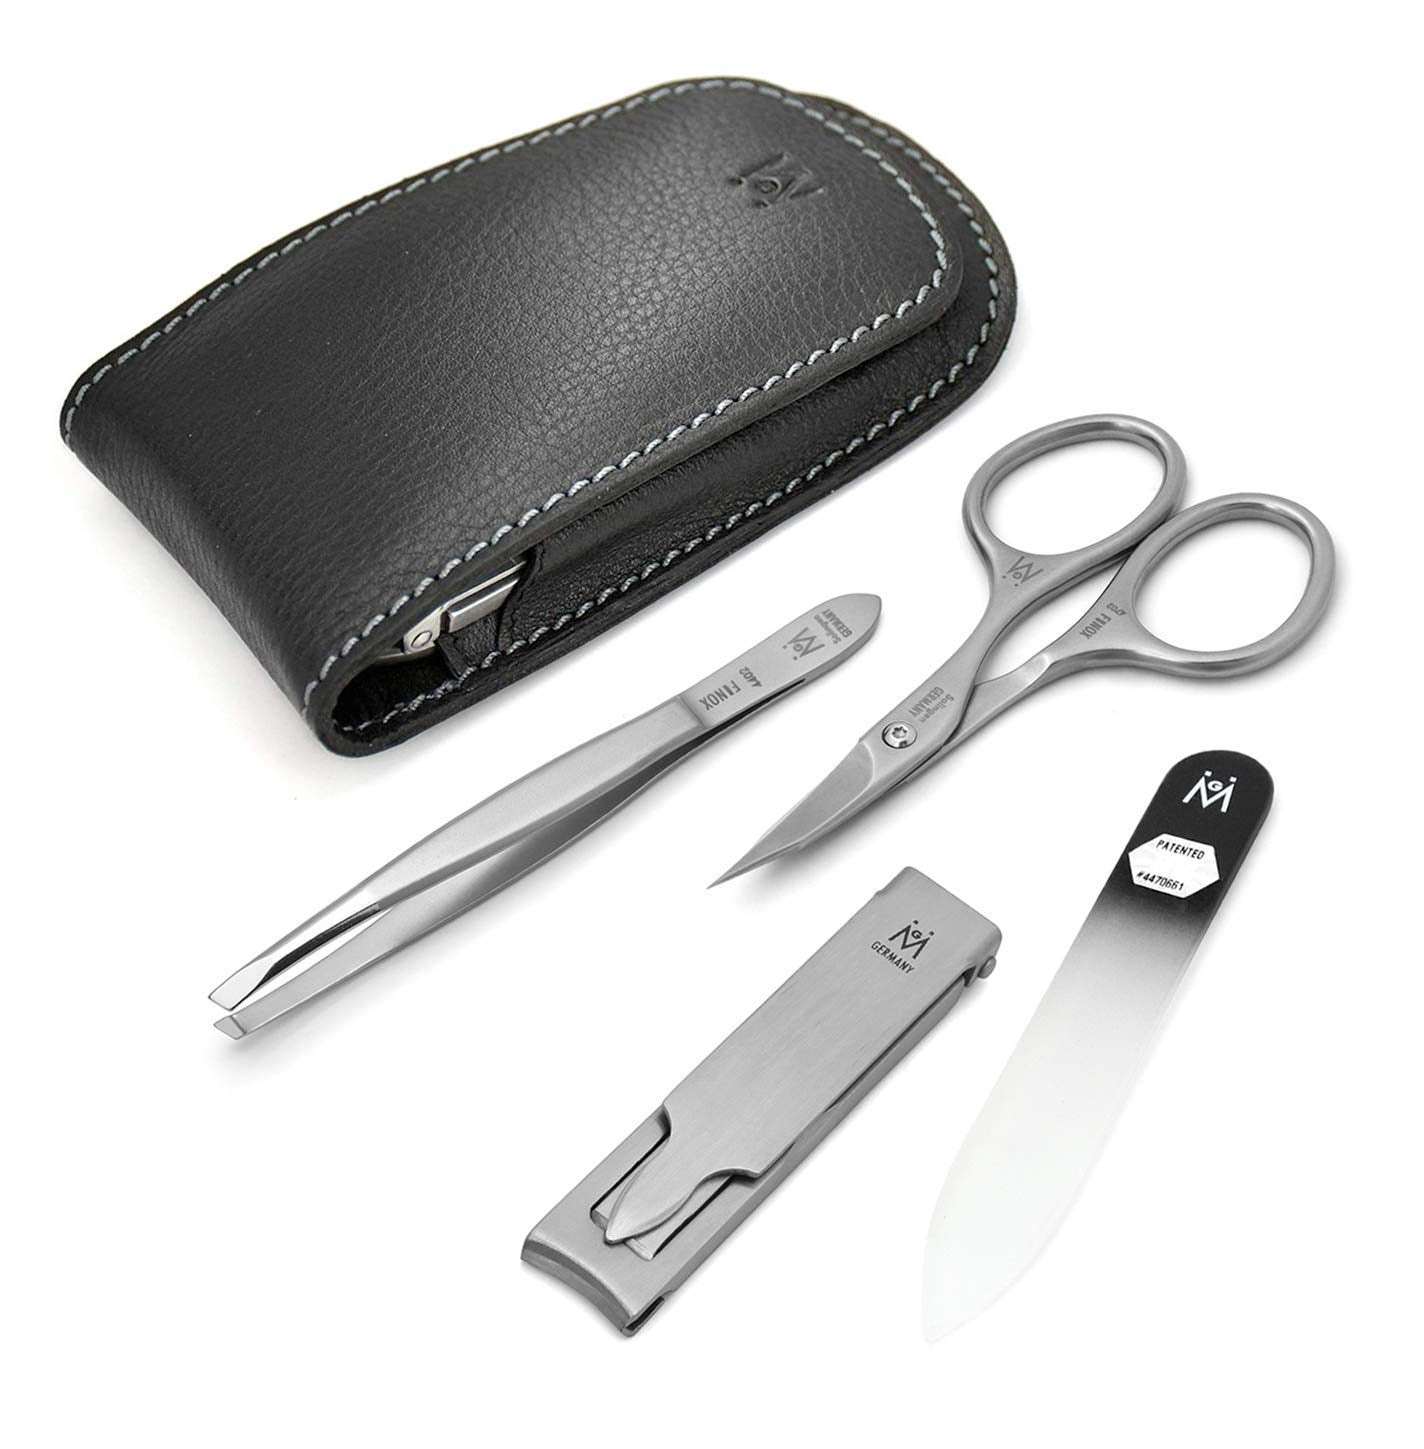 4 Piece Manicure Set in Black Leather Case: Folding Nail Clipper, Combination Scissor, Tweezer, and Travel Glass Nail File